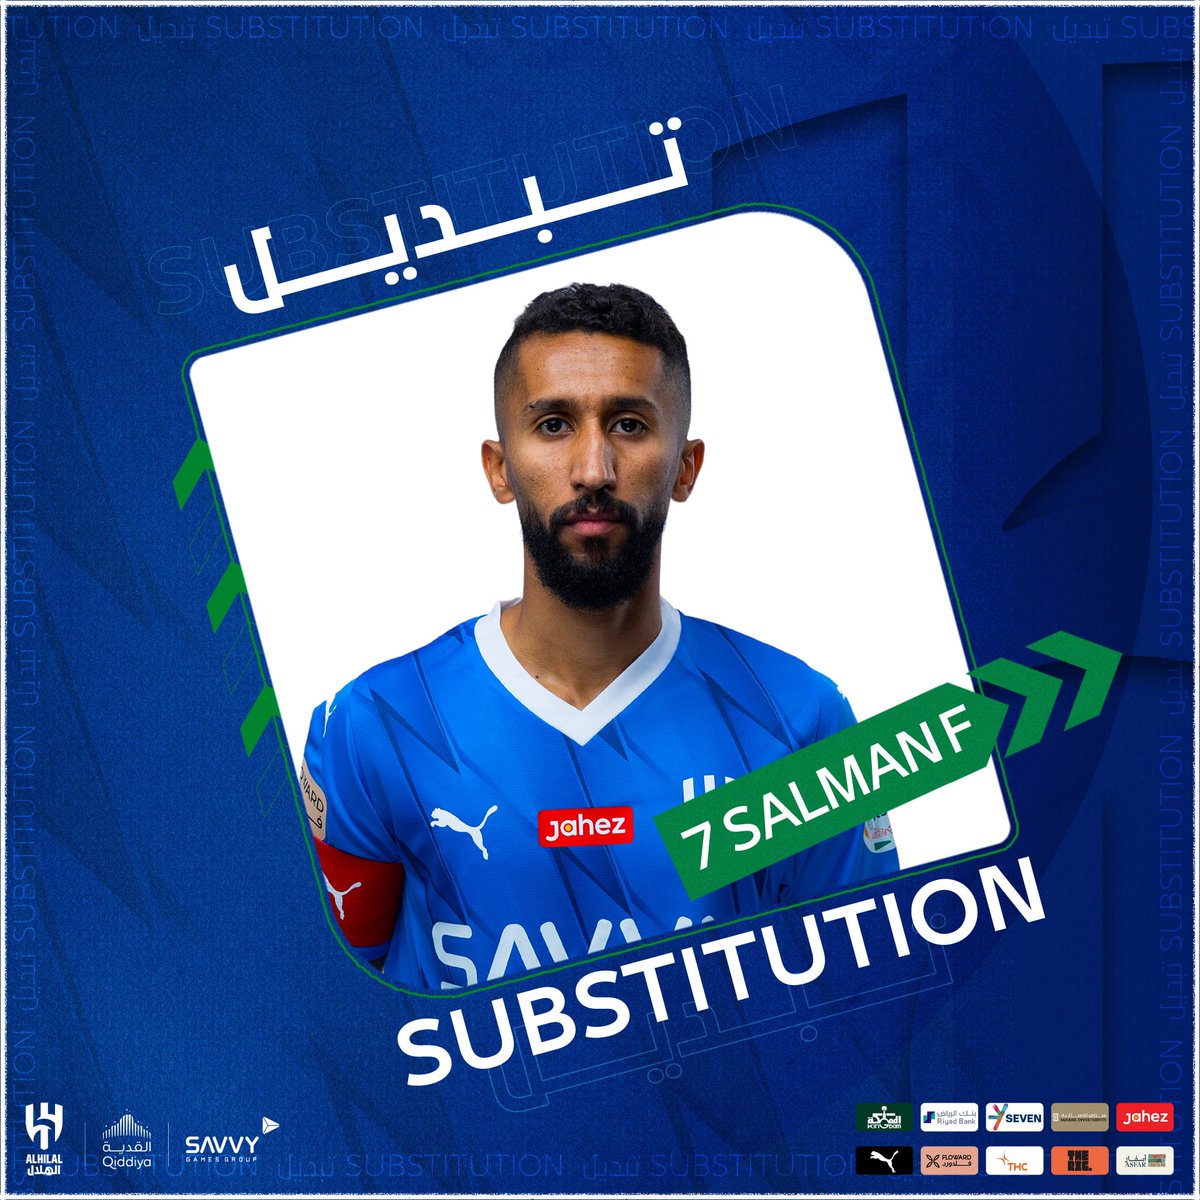 72’ SALMAN is on to replace ALBURAYK in the second substitution for #AlHilal 🔁 #AlNassr_AlHilal